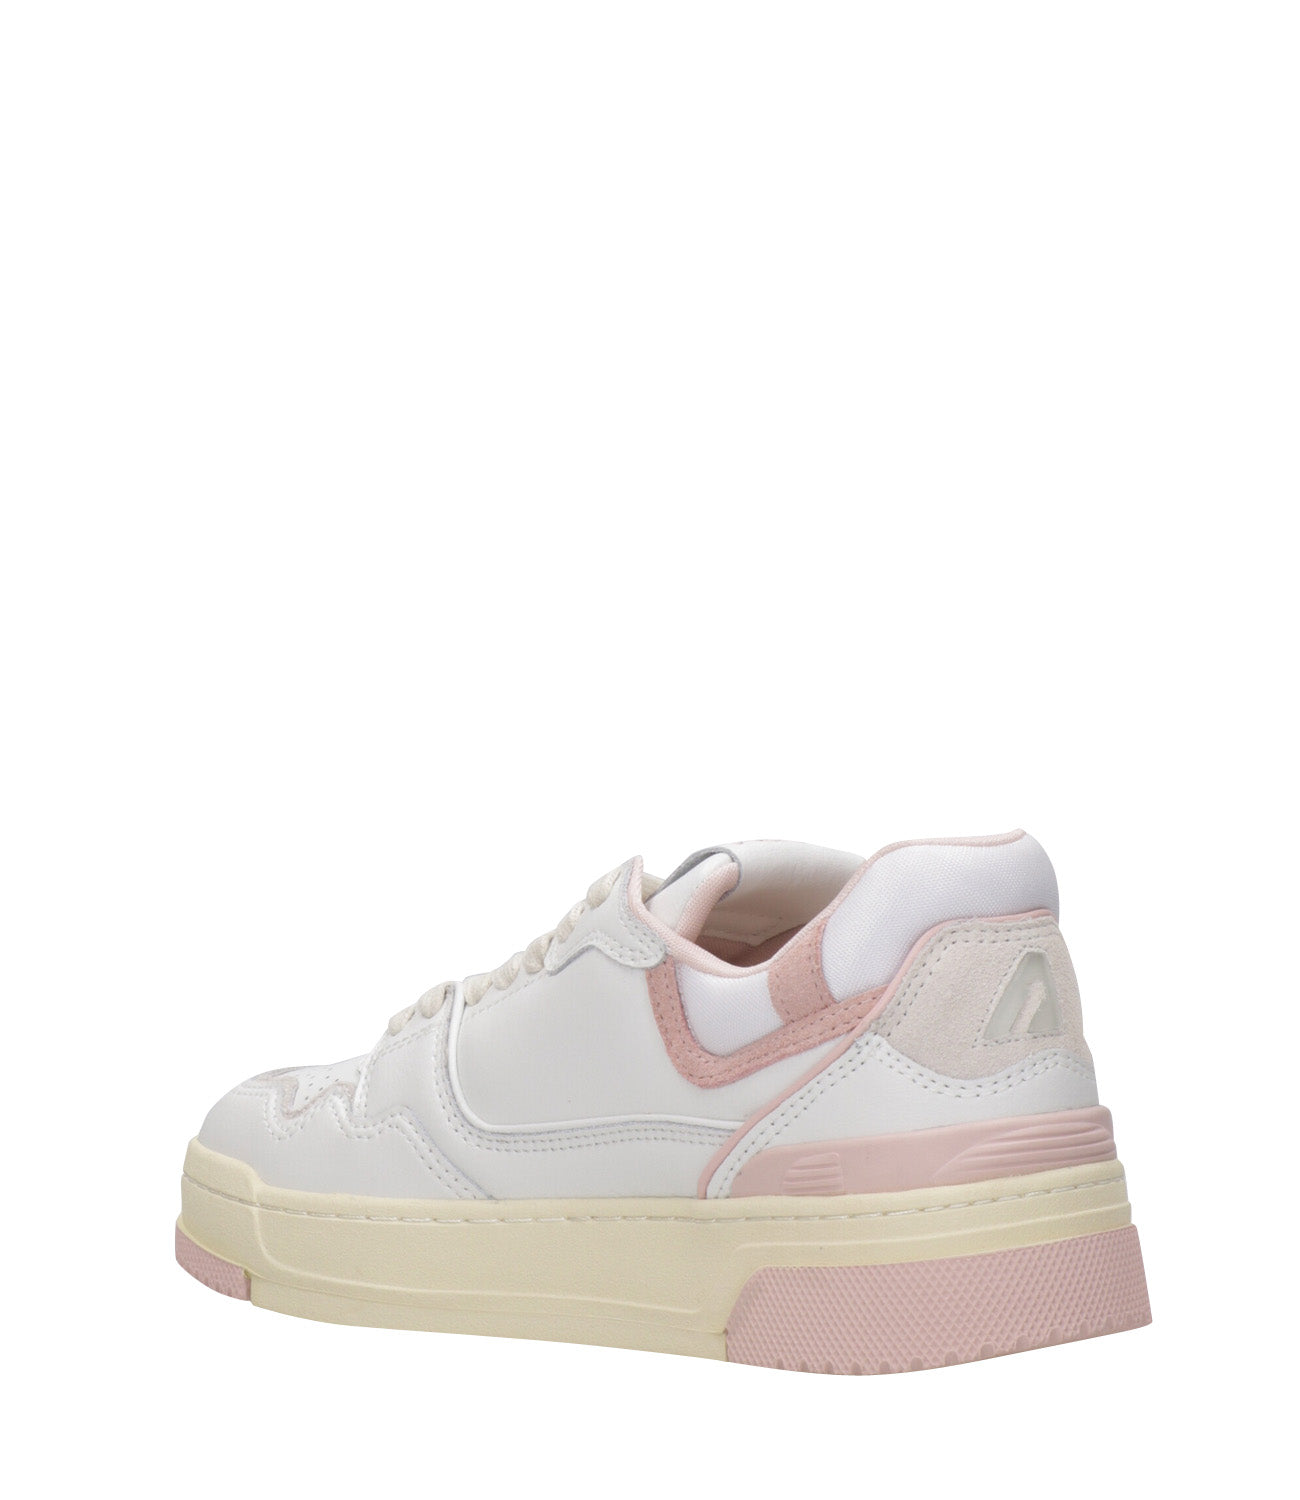 Autry | White Grey and Pink Sneaker